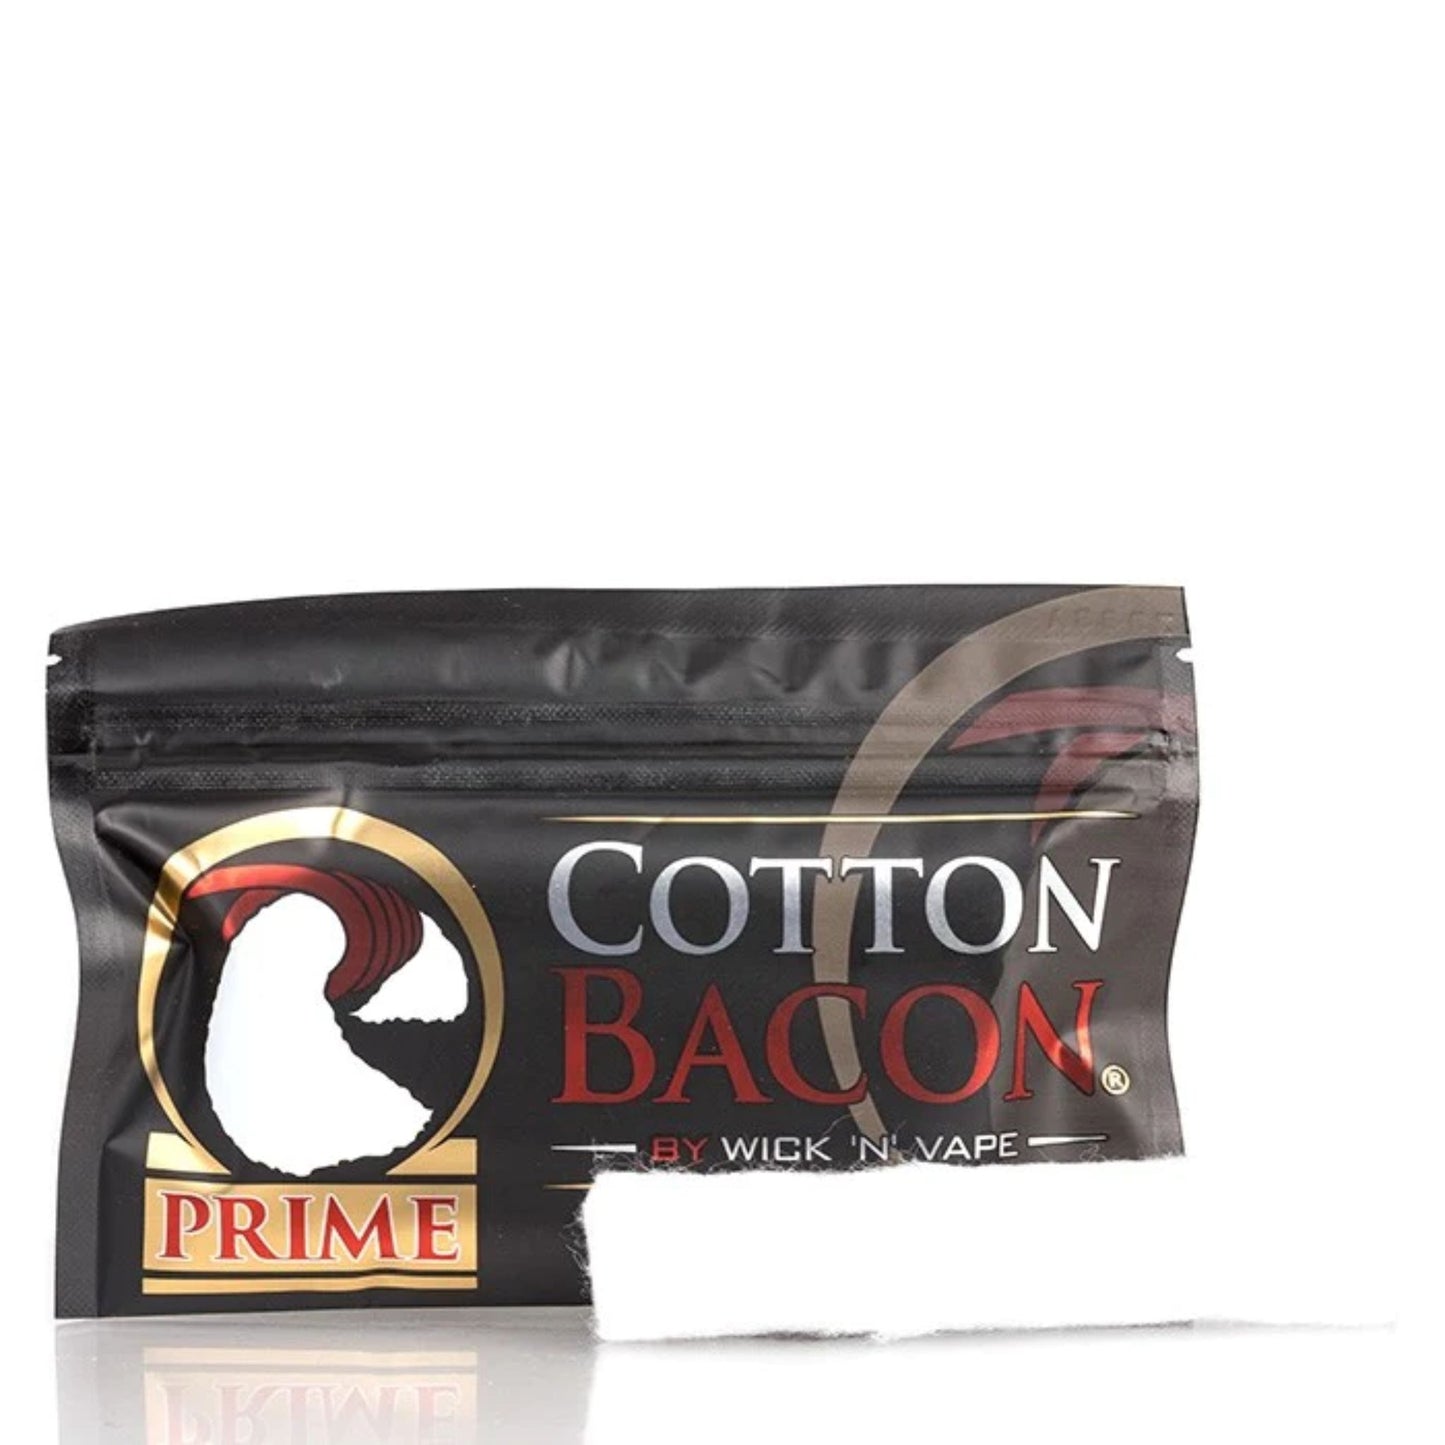 Wick 'n' Vape Cotton Bacon Prime with cotton